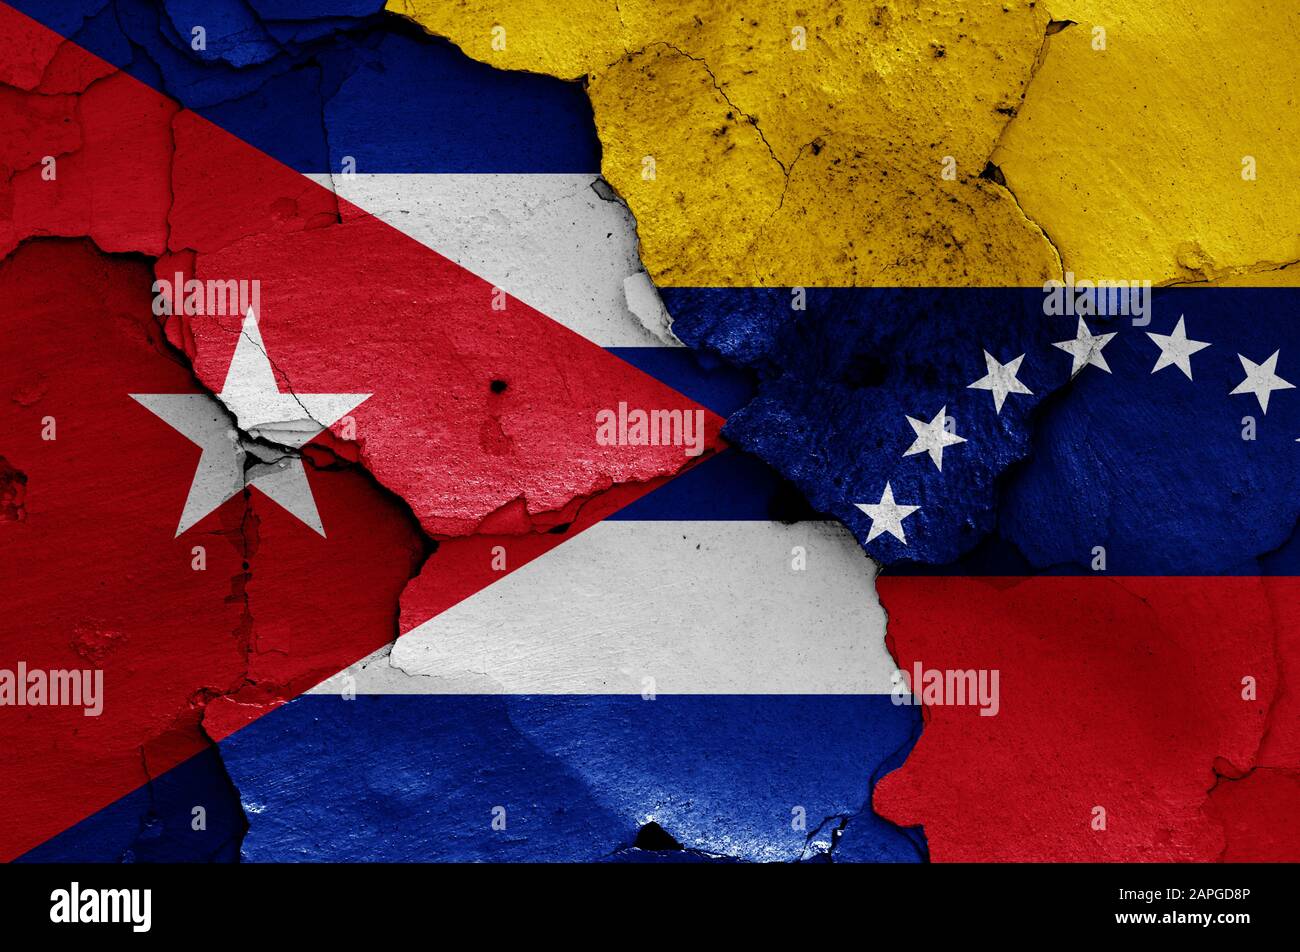 flags of Cuba and Venezuela painted on cracked wall Stock Photo